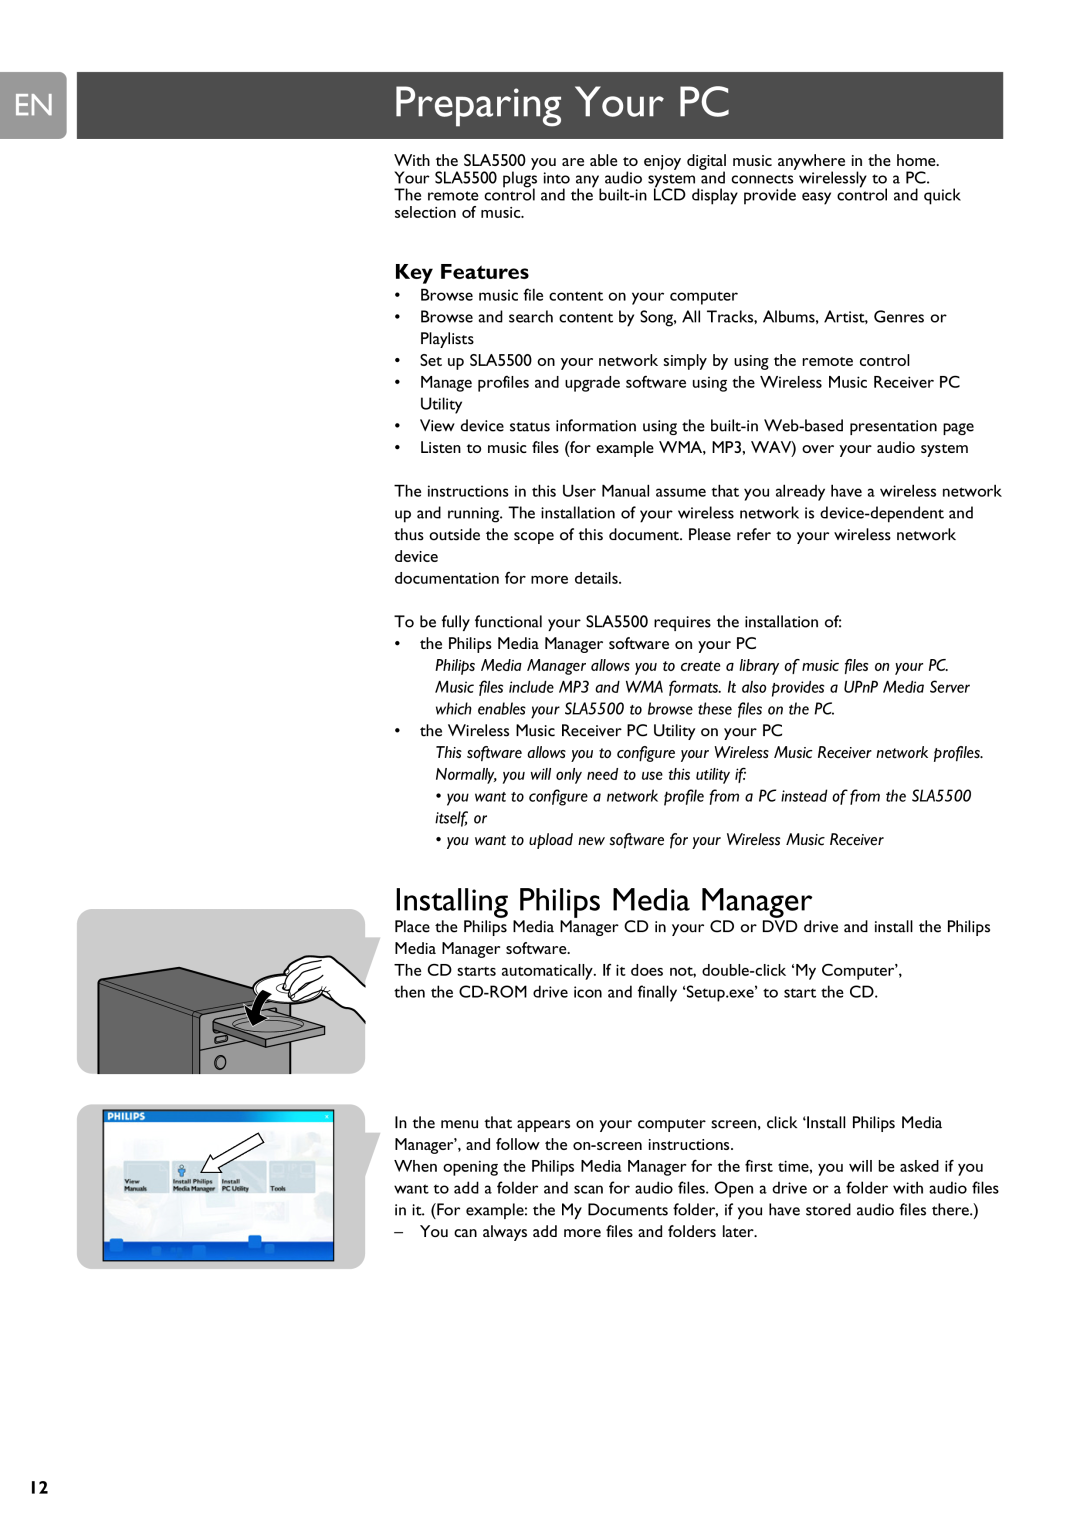 Philips SLA5500 user manual Preparing Your PC, Installing Philips Media Manager, Key Features 